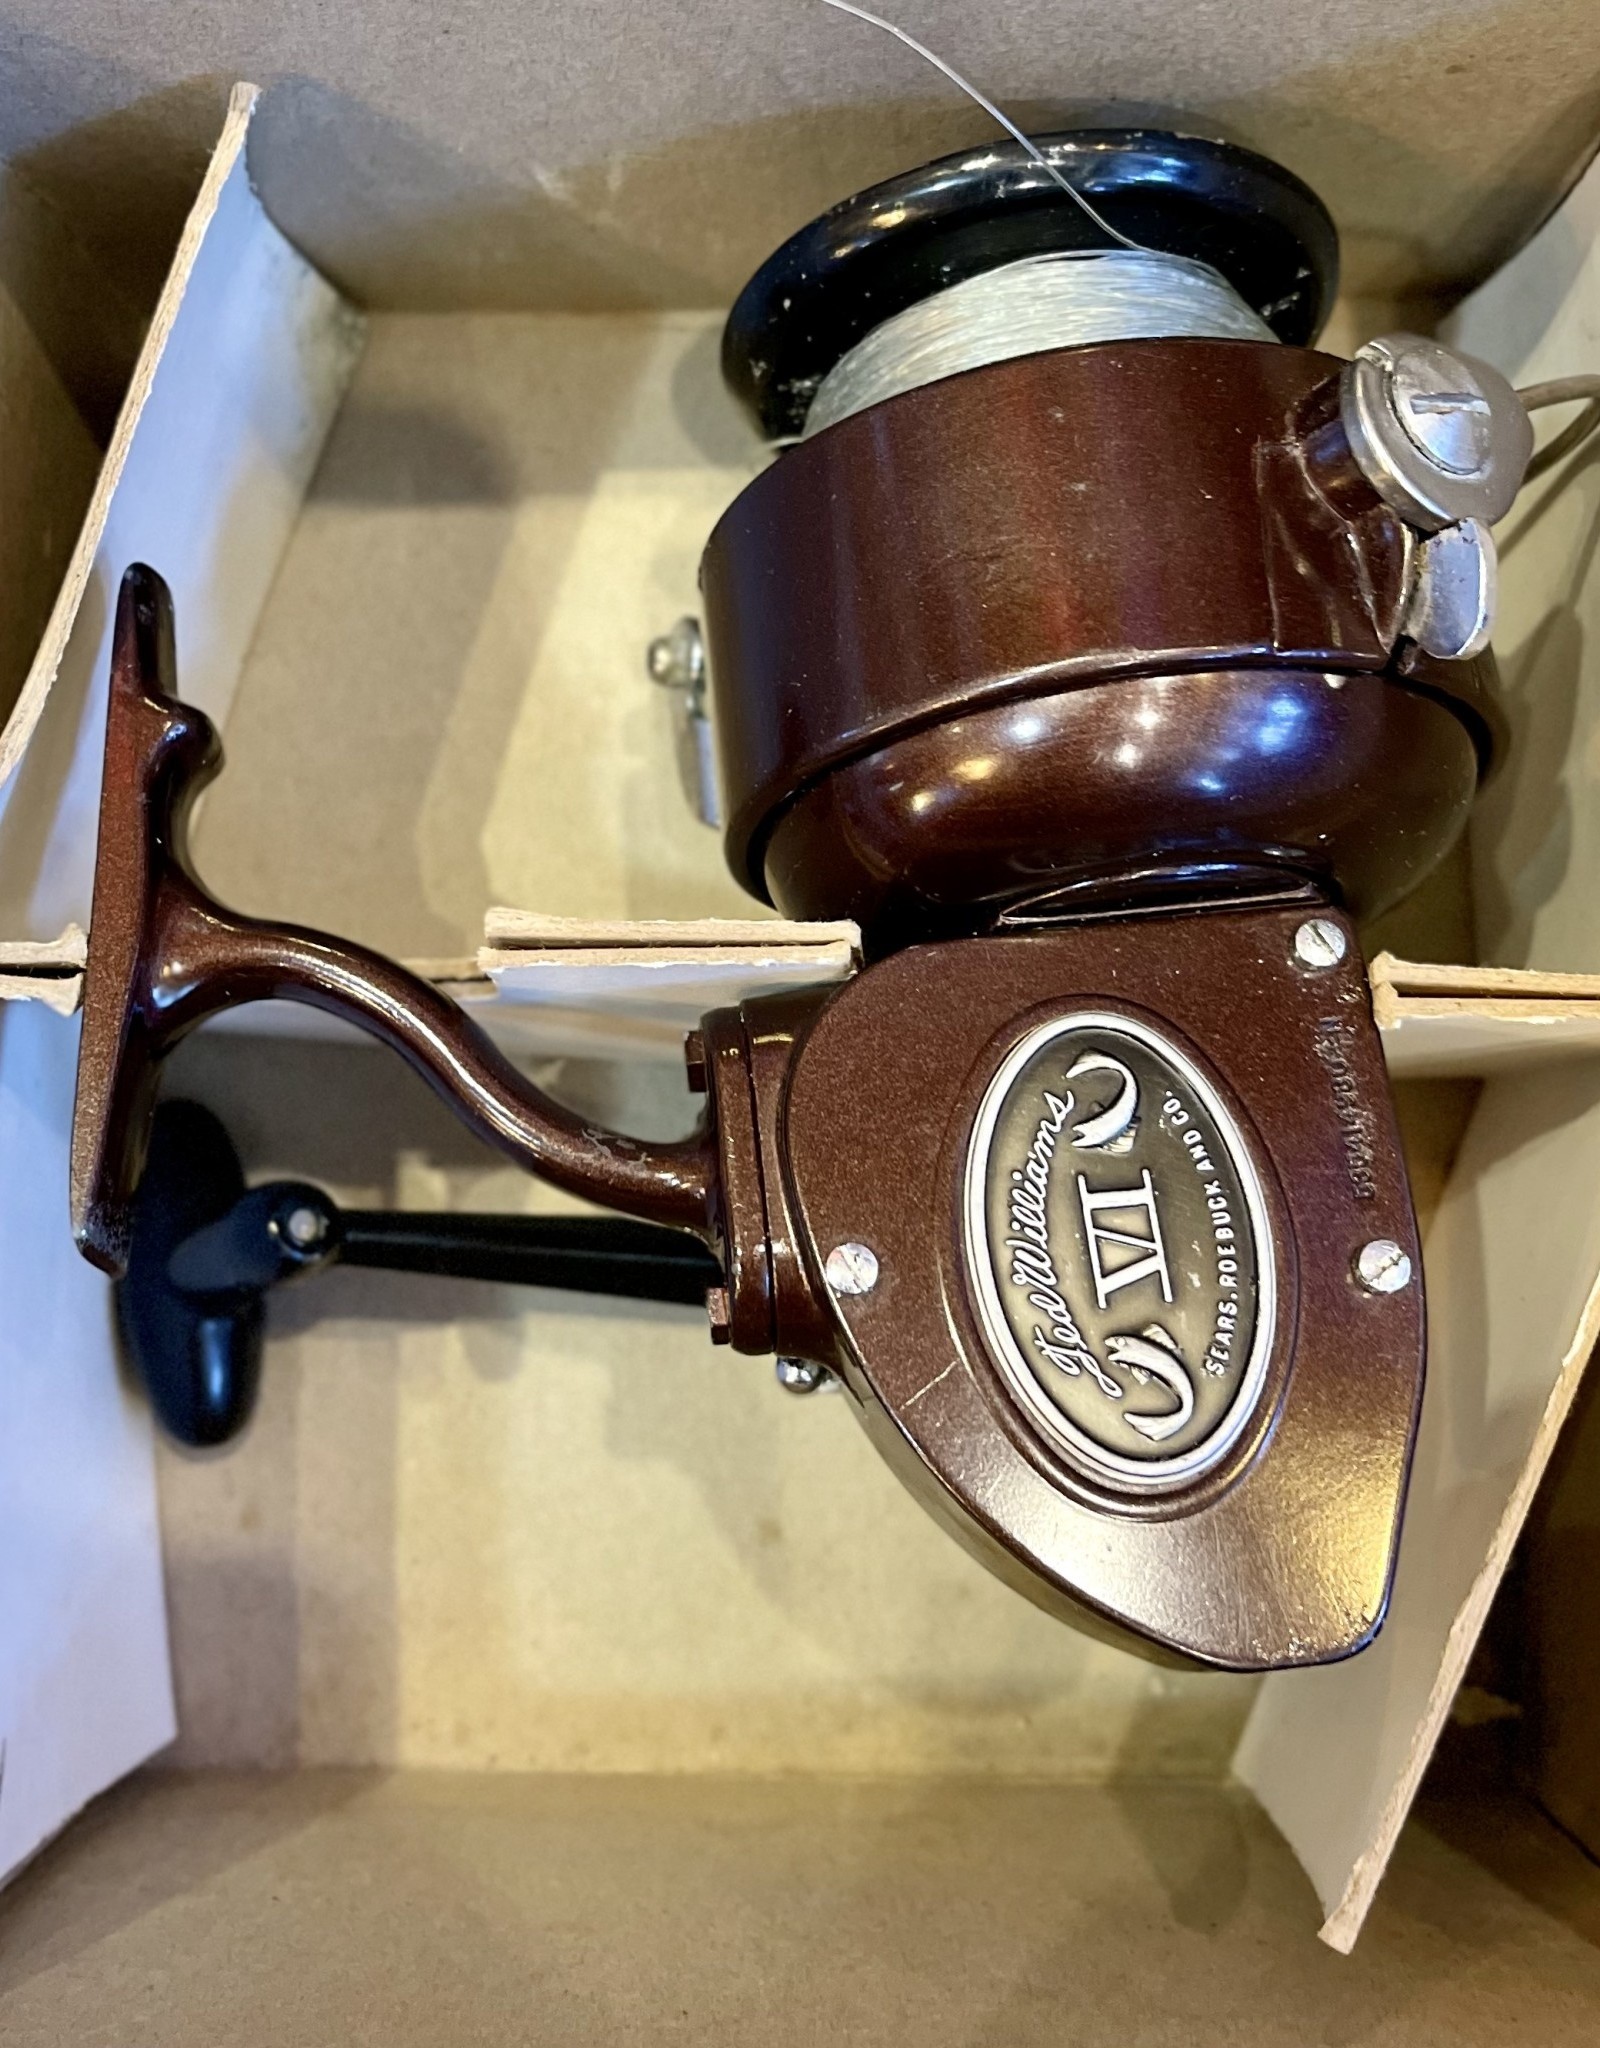 Purple Pigeon Treasures Ted WIlliams Fishing Reel Model #535414980 1960’s with Original Box and Documents